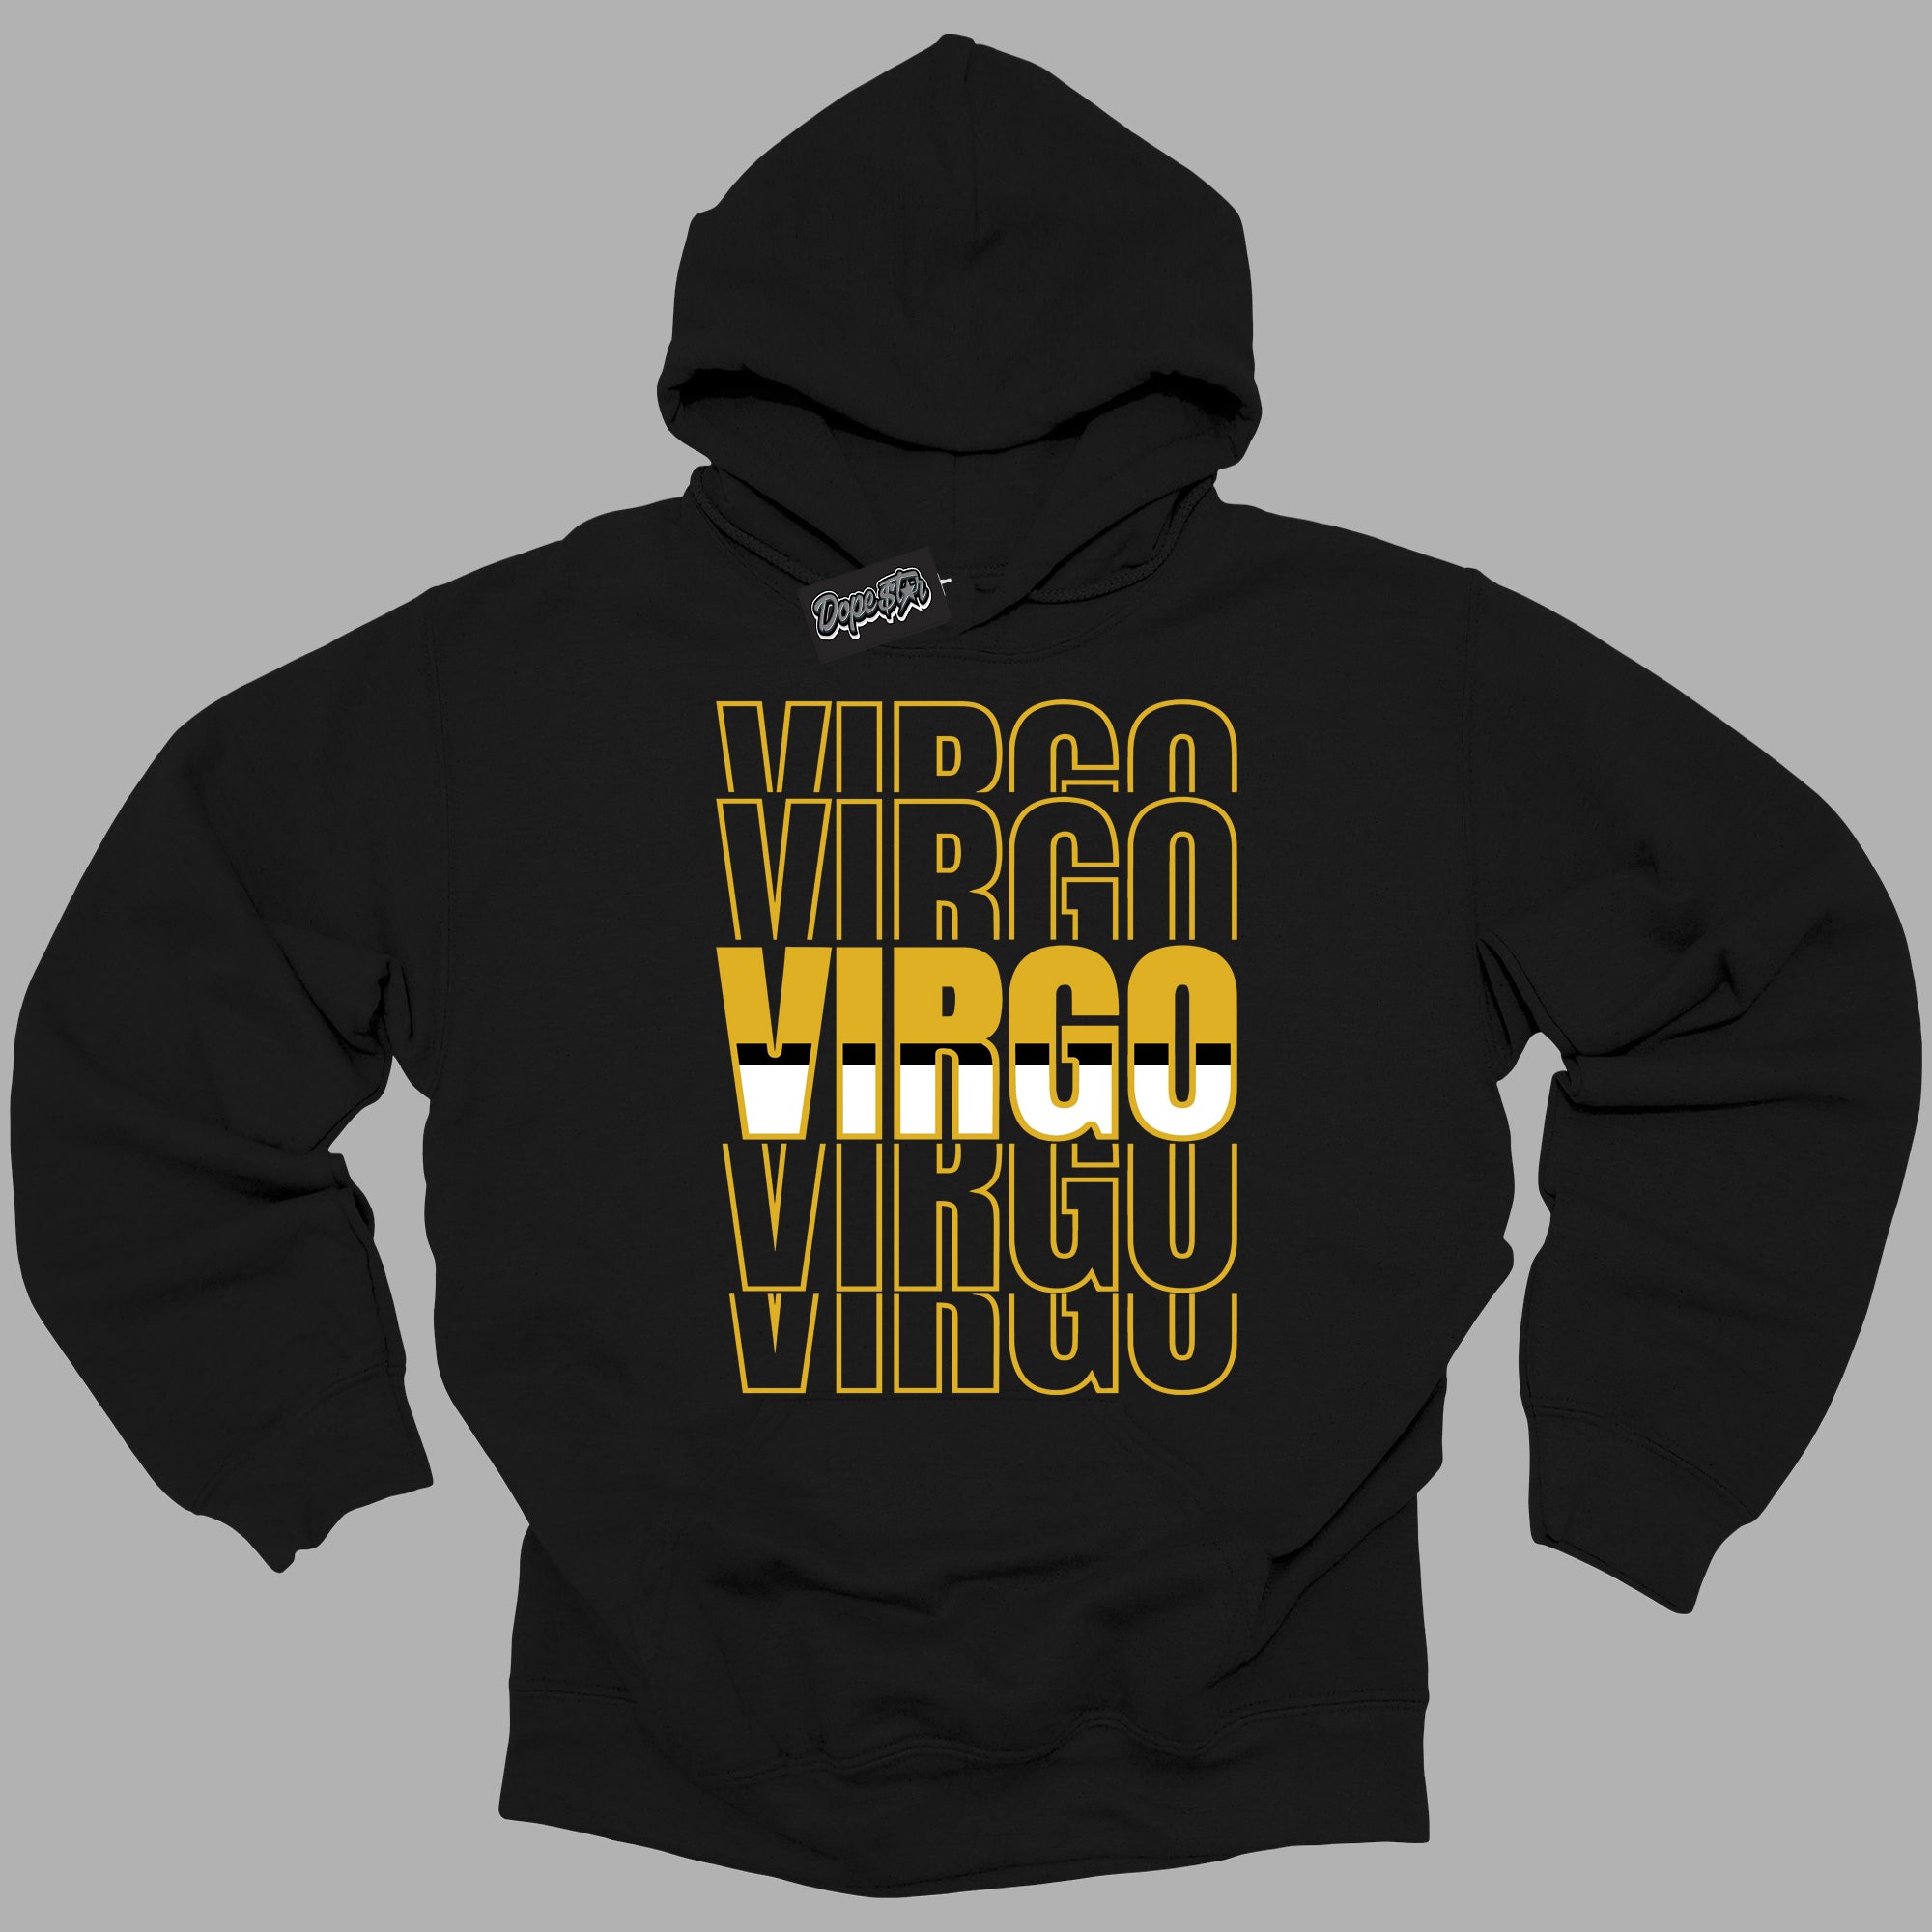 Cool Black Hoodie with “Virgo ”  design that Perfectly Matches Yellow Ochre 6s Sneakers.